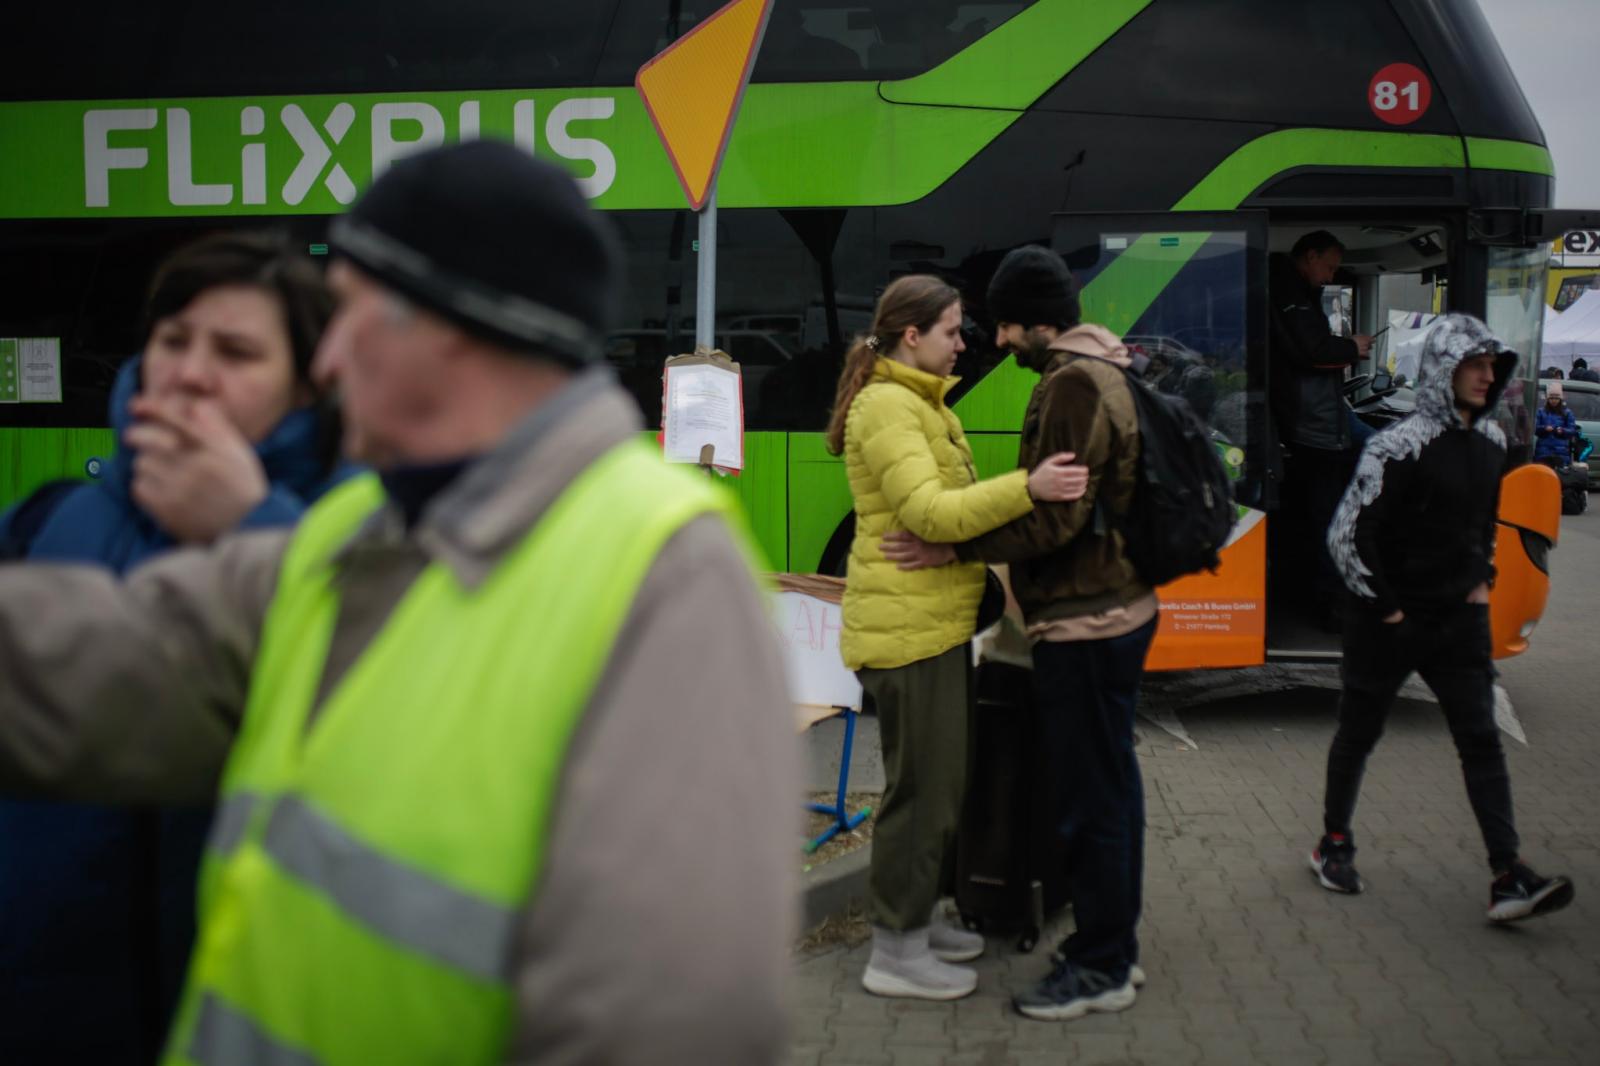 Ahmed, an Iranian student studying in Kiev, says goodbye in Poland to his Ukrainian girlfriend...